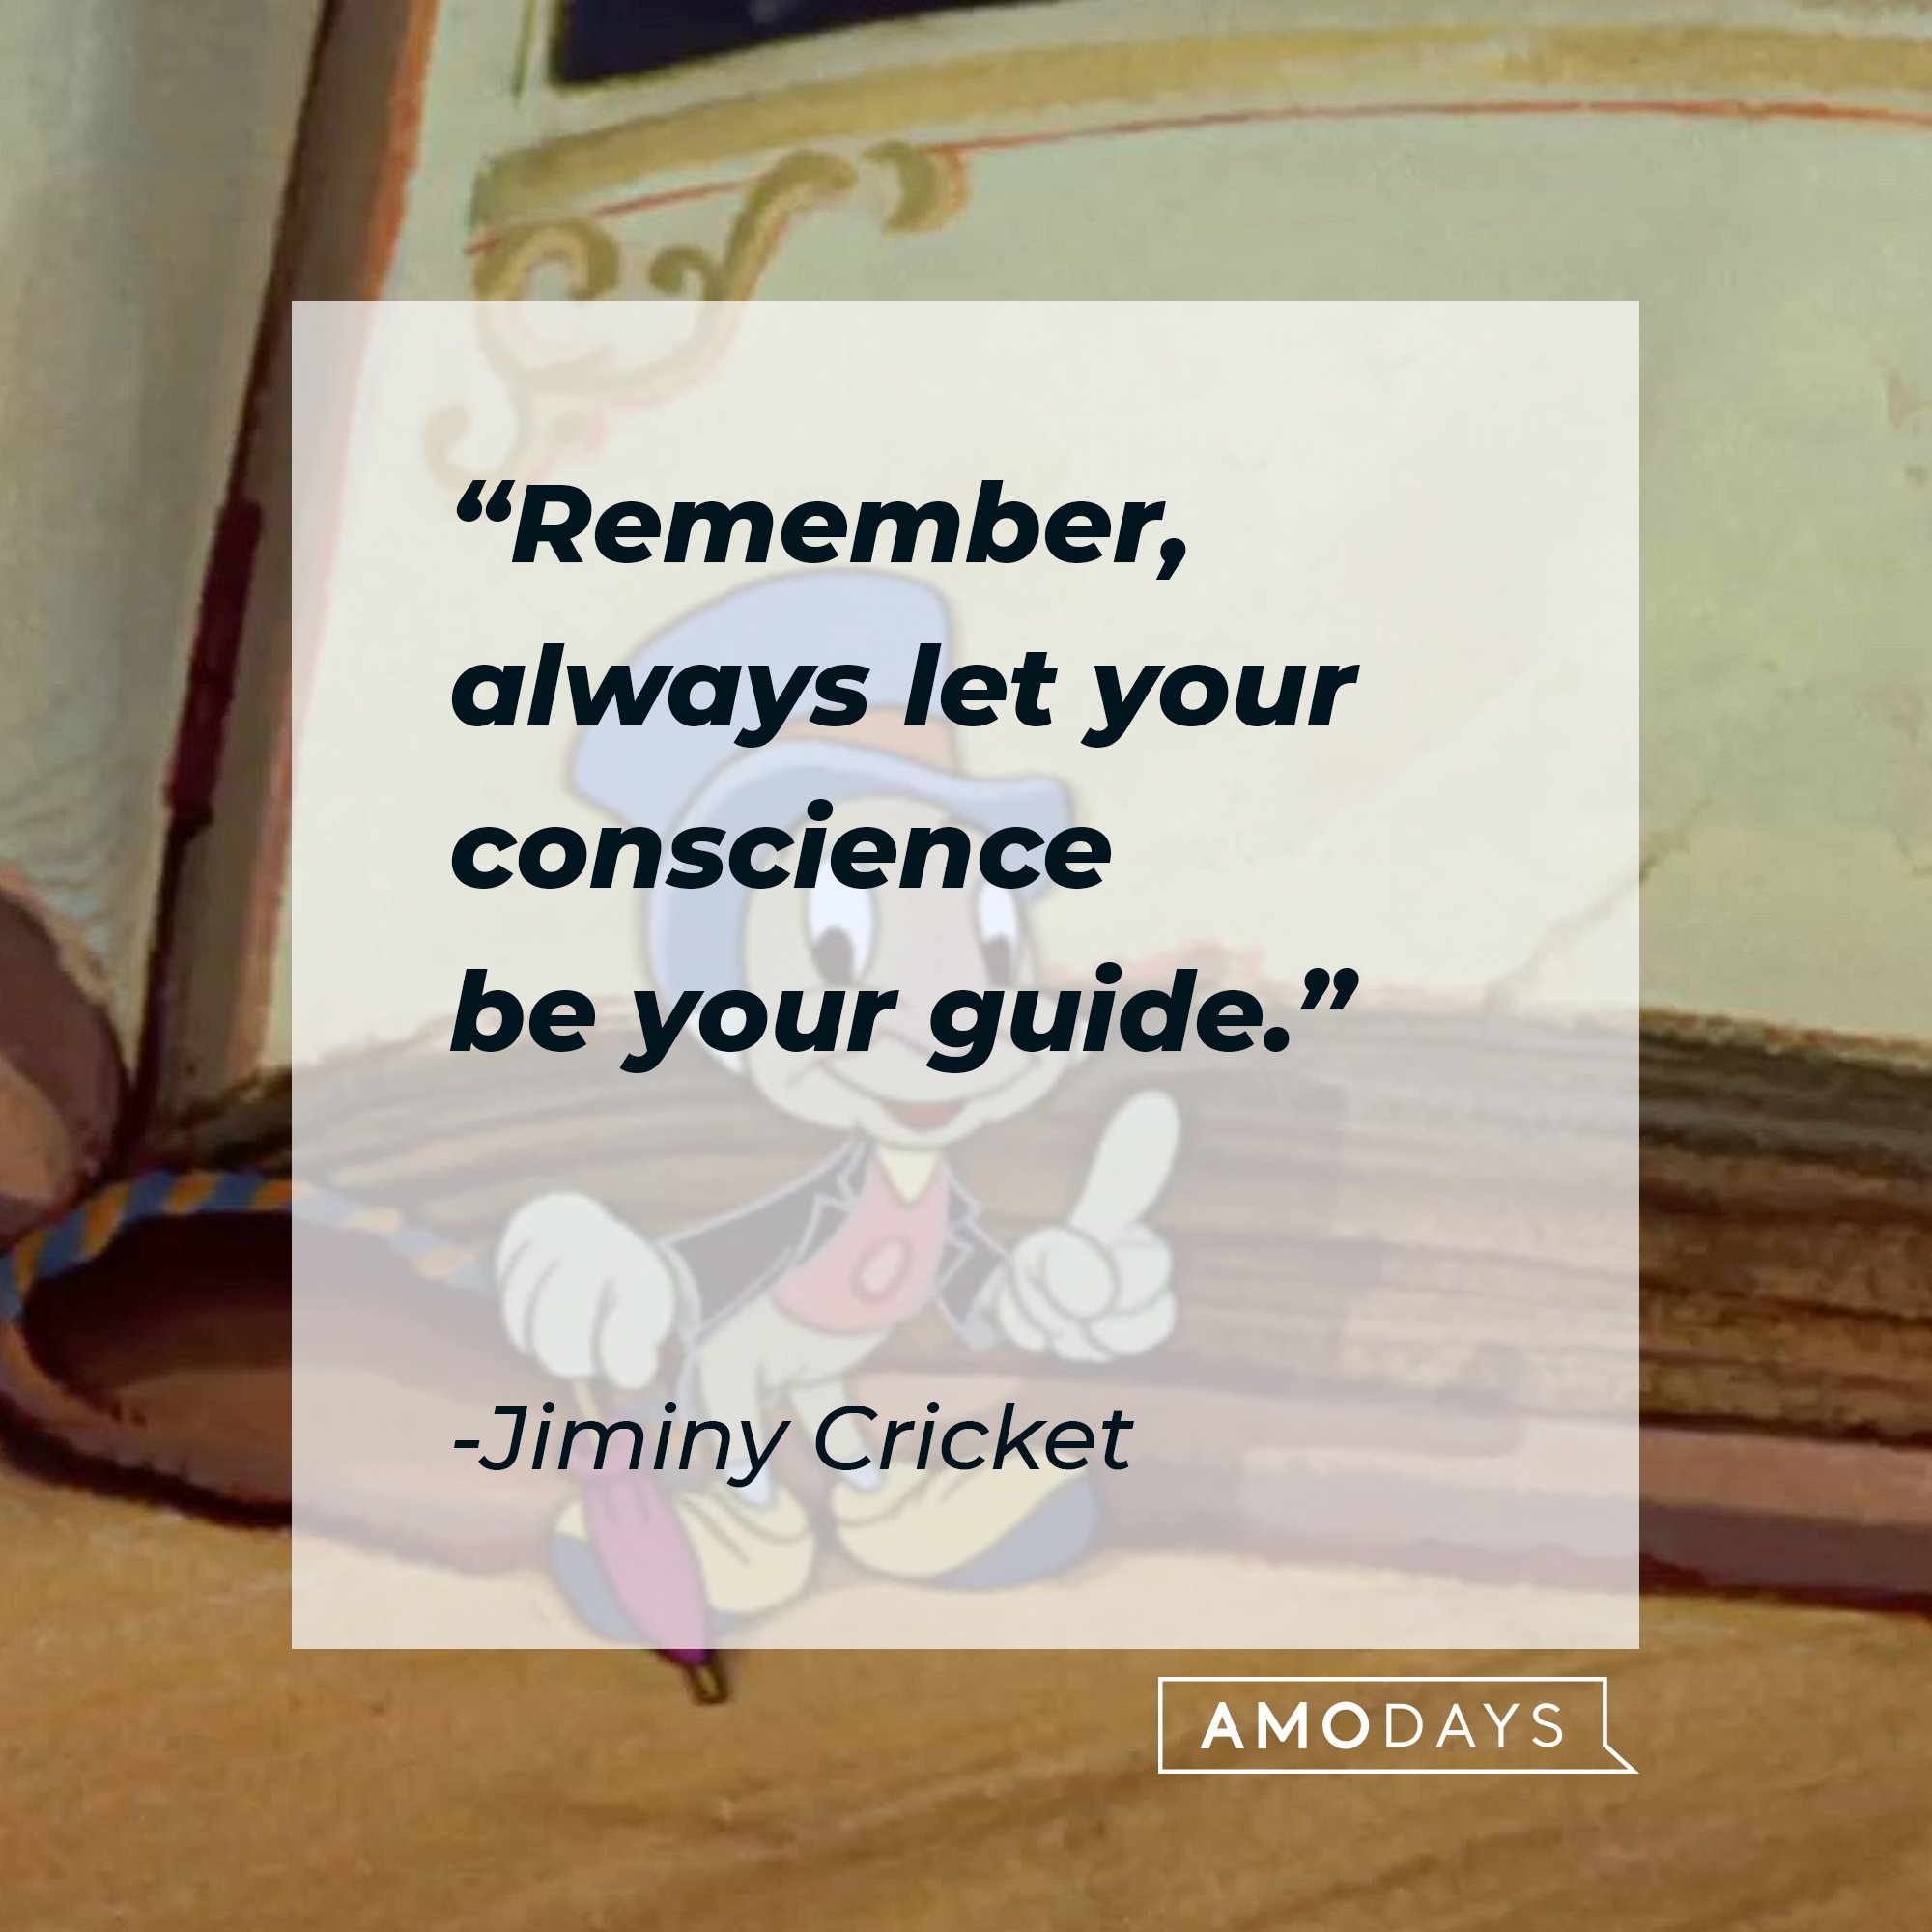  Jiminy Cricket's quote: "Remember, always let your conscience be your guide." |  Image: AmoDays